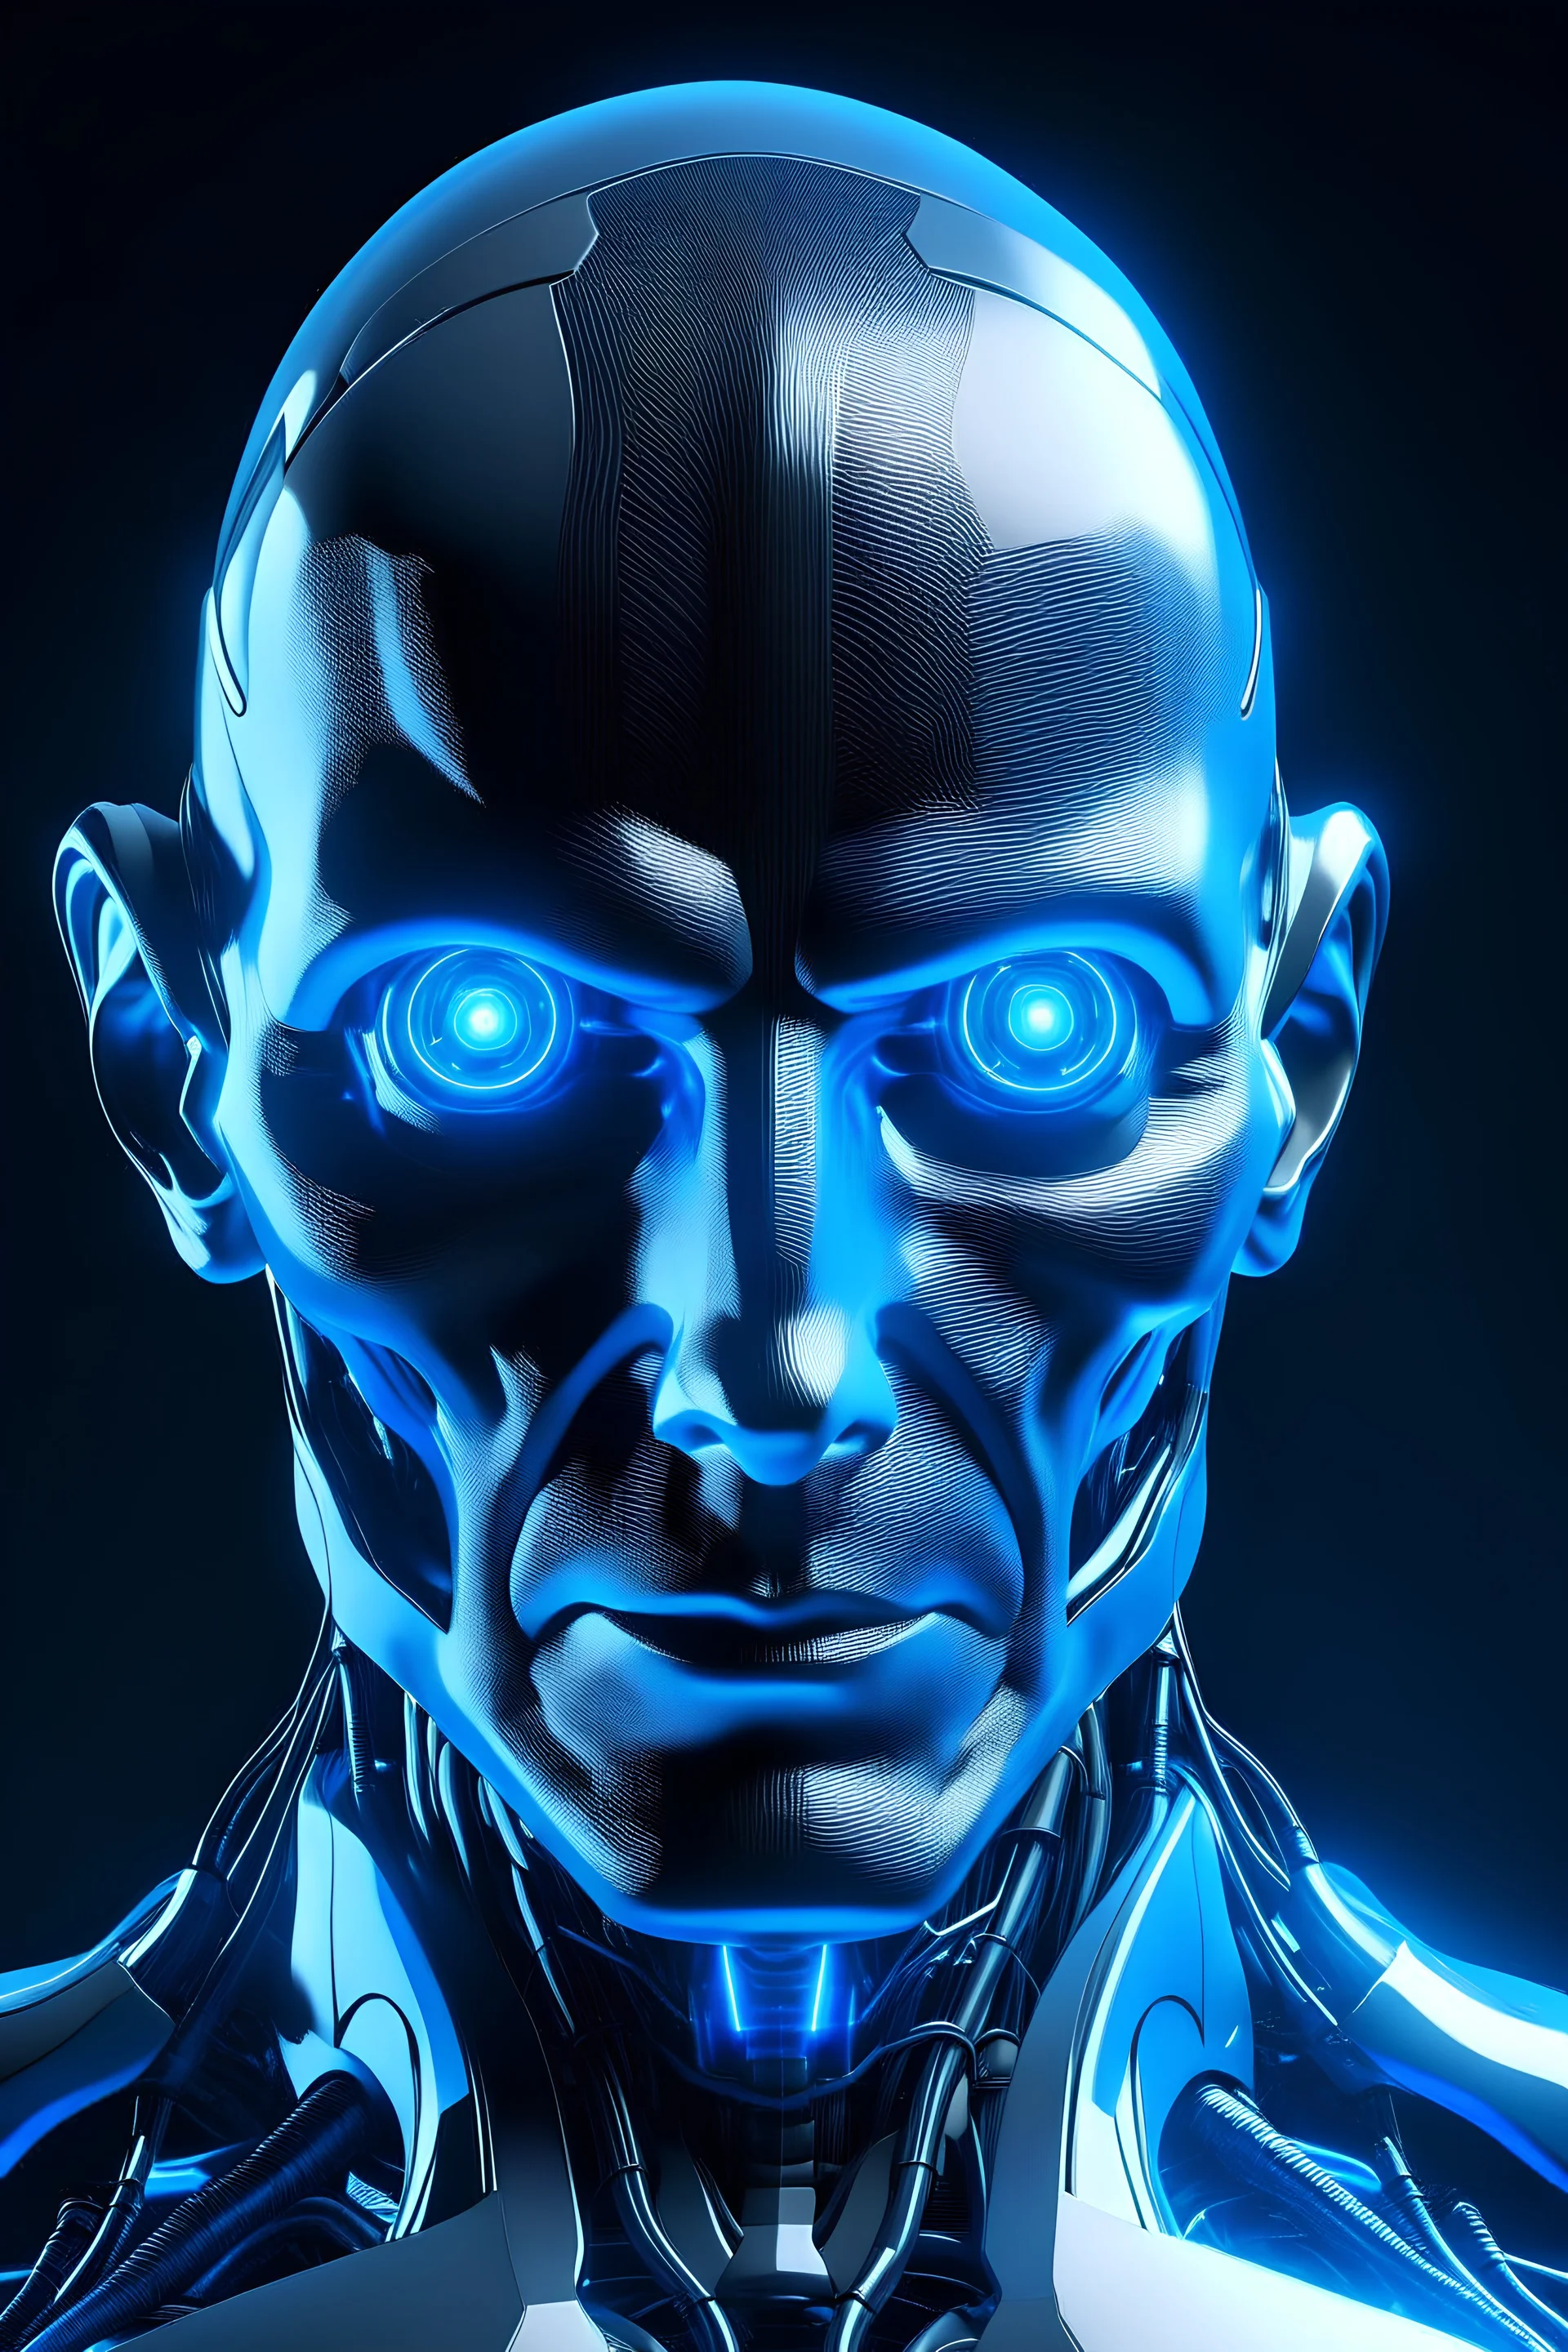 Bionic Science Man with a robotic head complete with a luminous blue laser and an eye